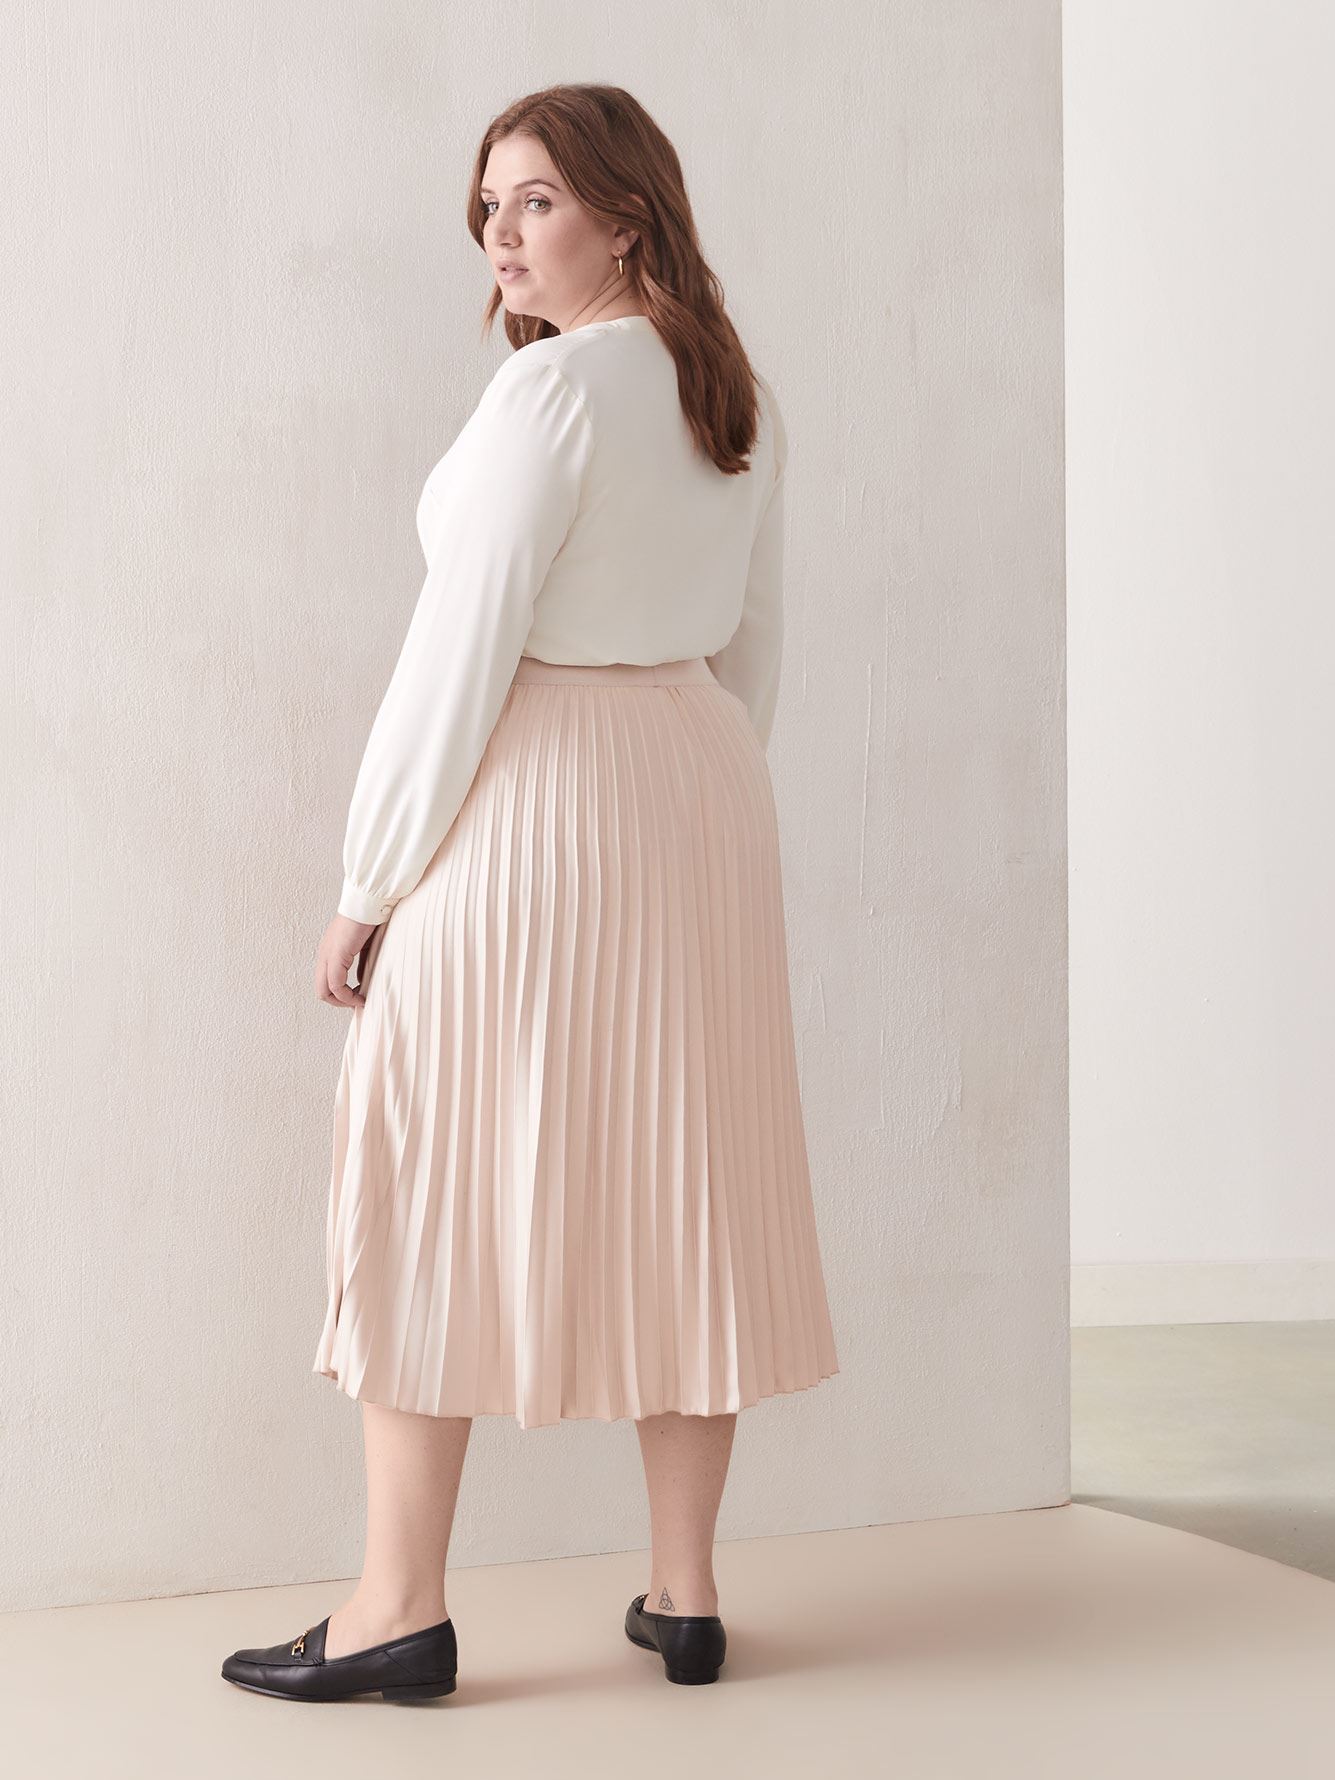 Pleated Skirt with Ruffle Detail - Addition Elle